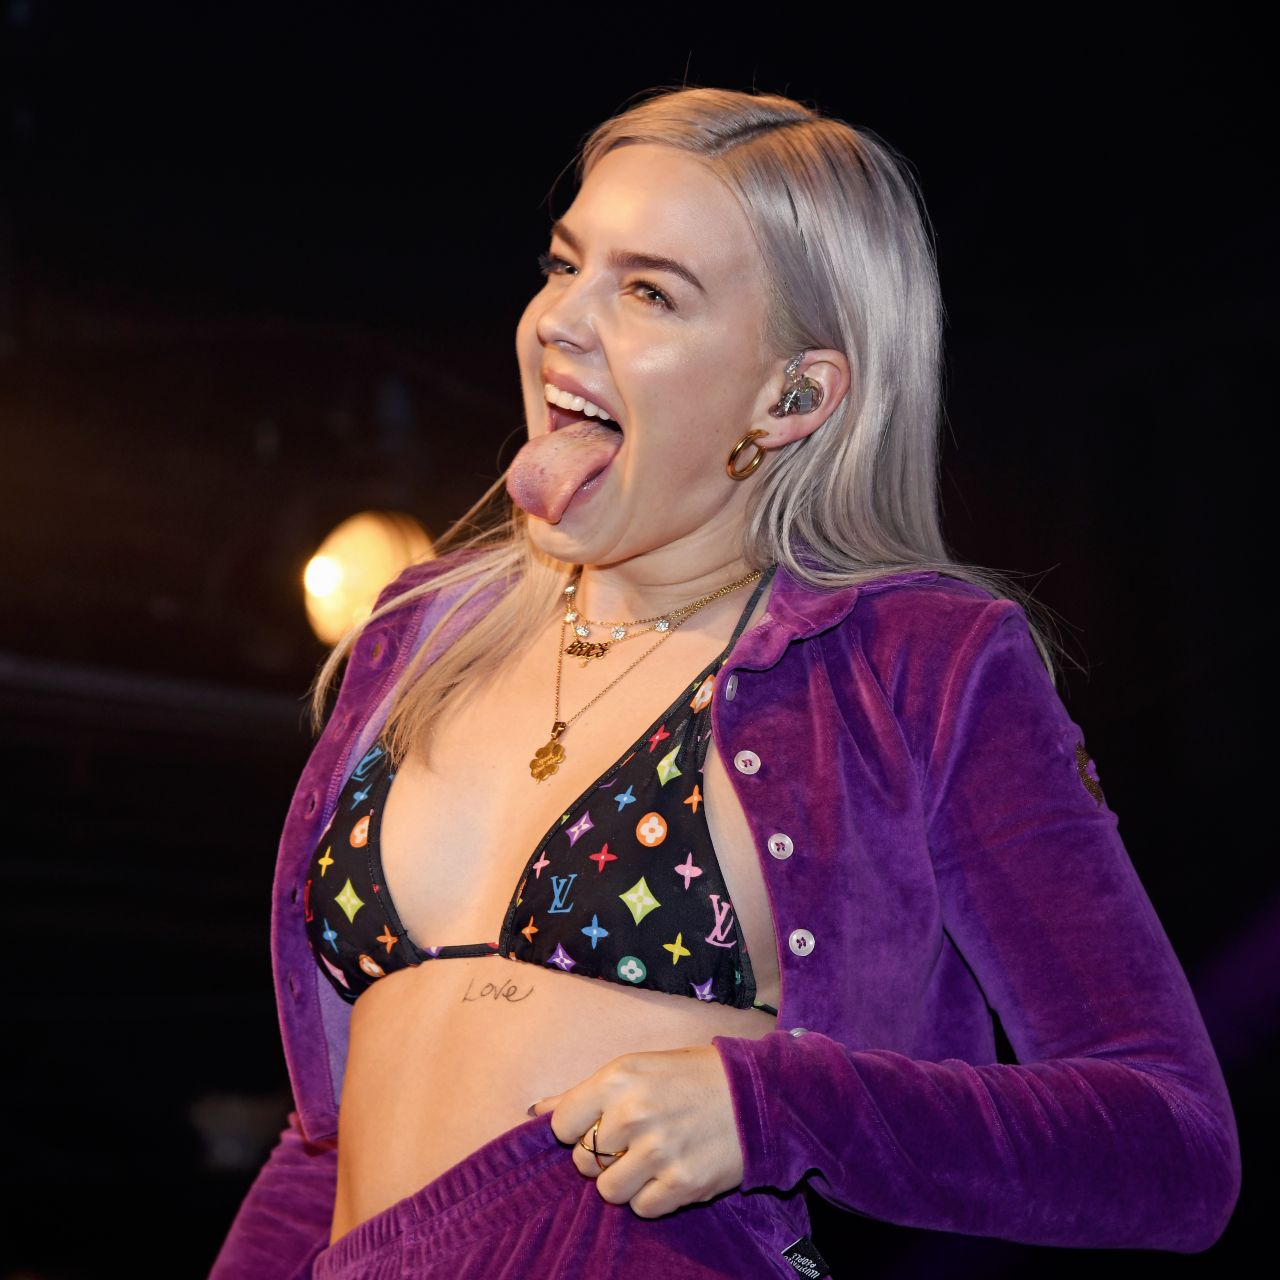 Anne-Marie - Launches Her Debut Album at G-A-Y in London 04/28/2018.